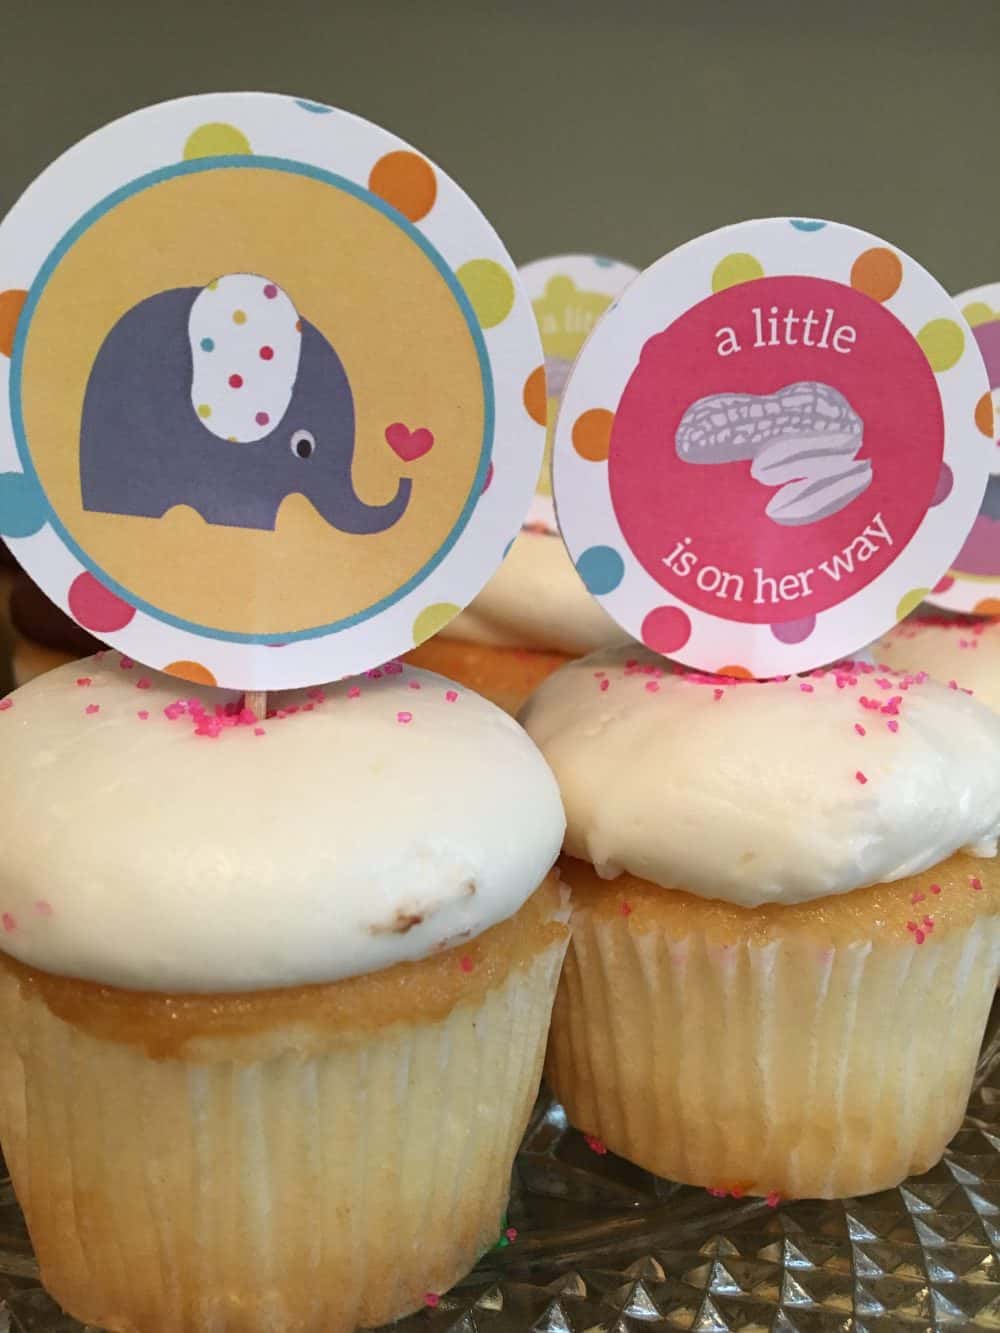 a little peanut is on her way cupcakes